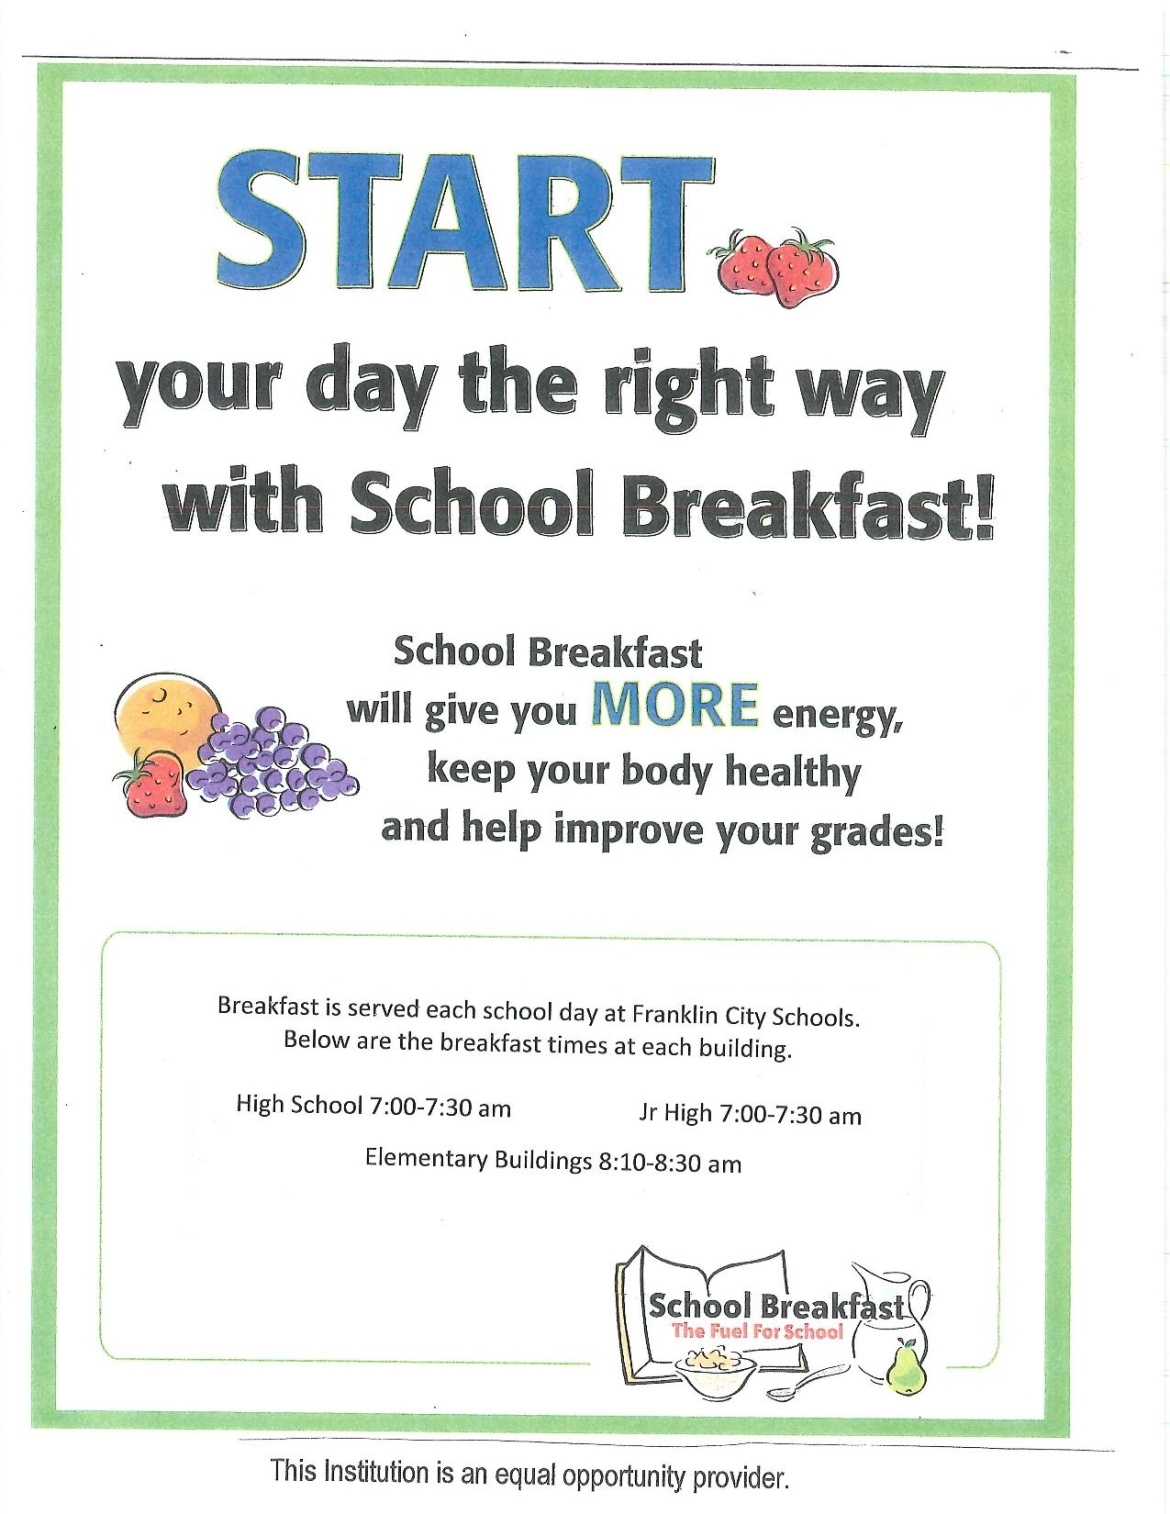 START your day the right way with School Breakfast! poster